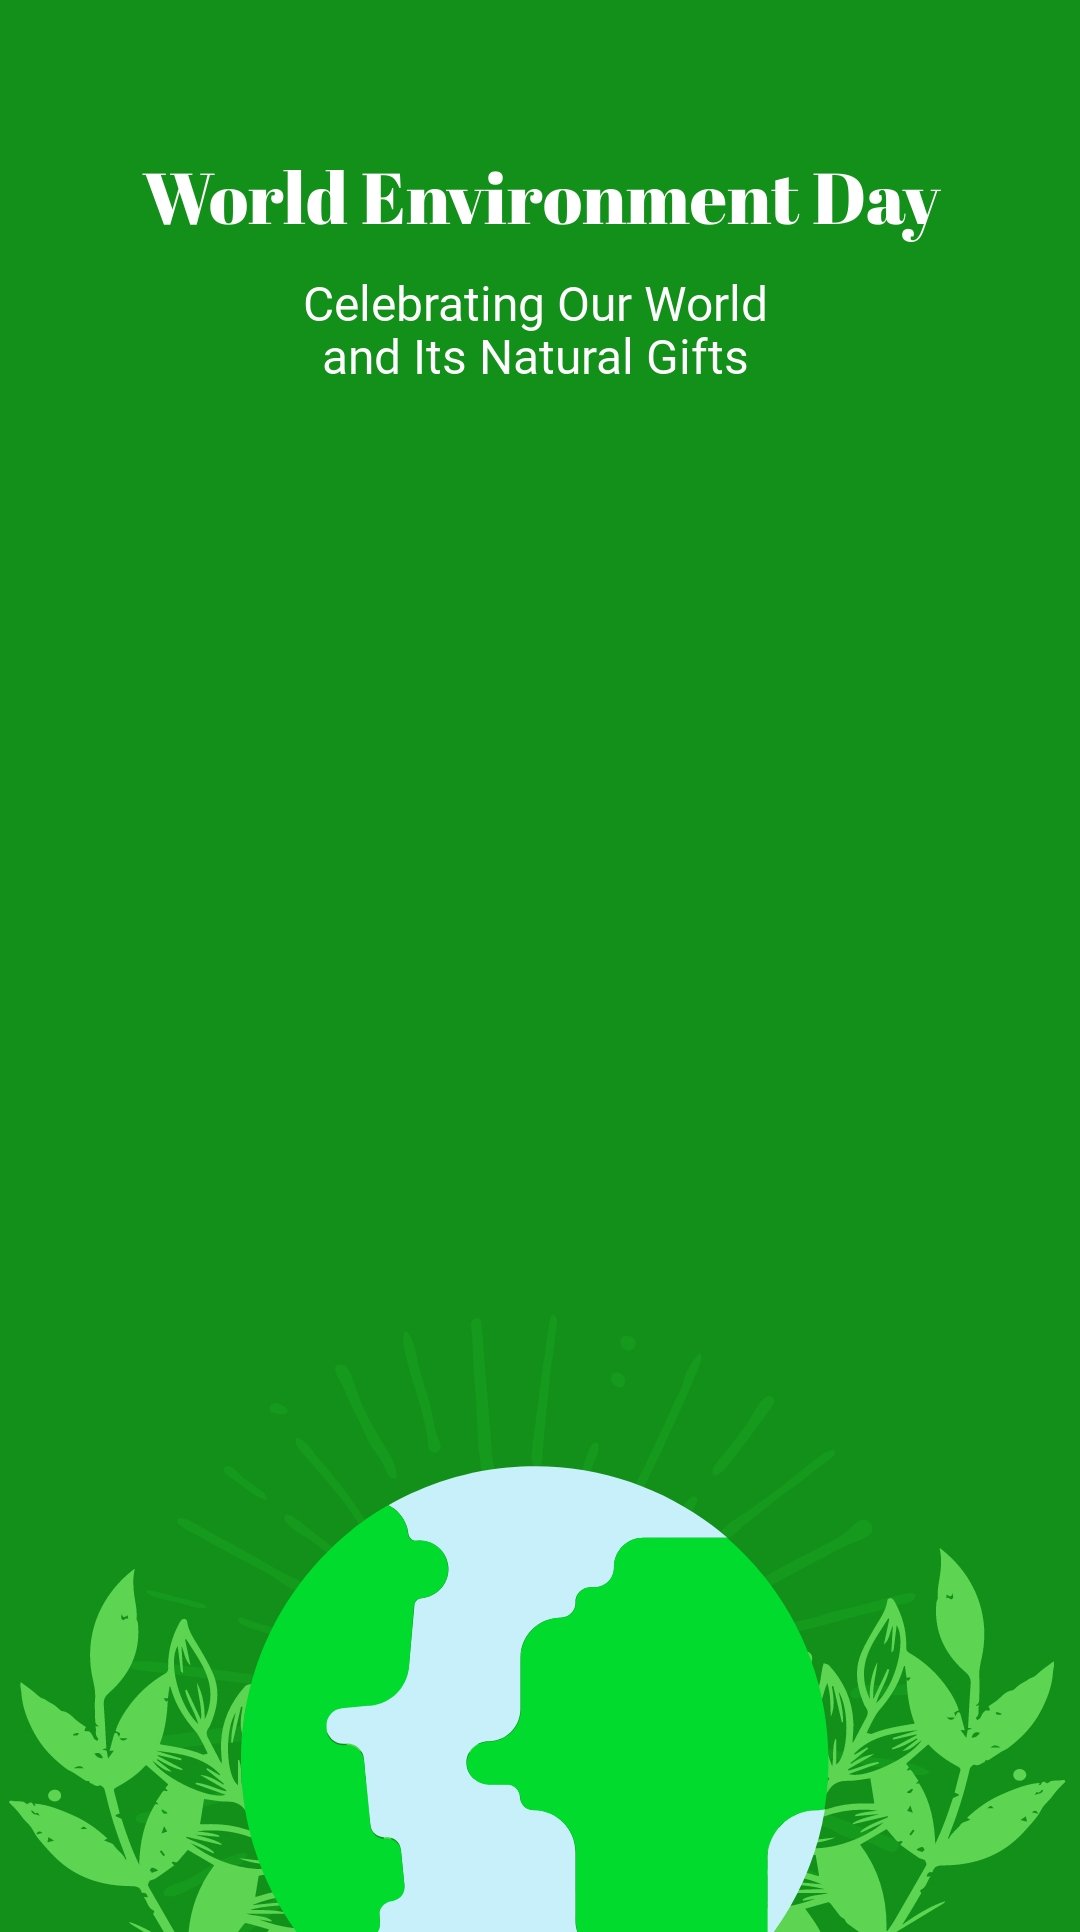 World Environment Day Snapchat Geofilter Template.jpe